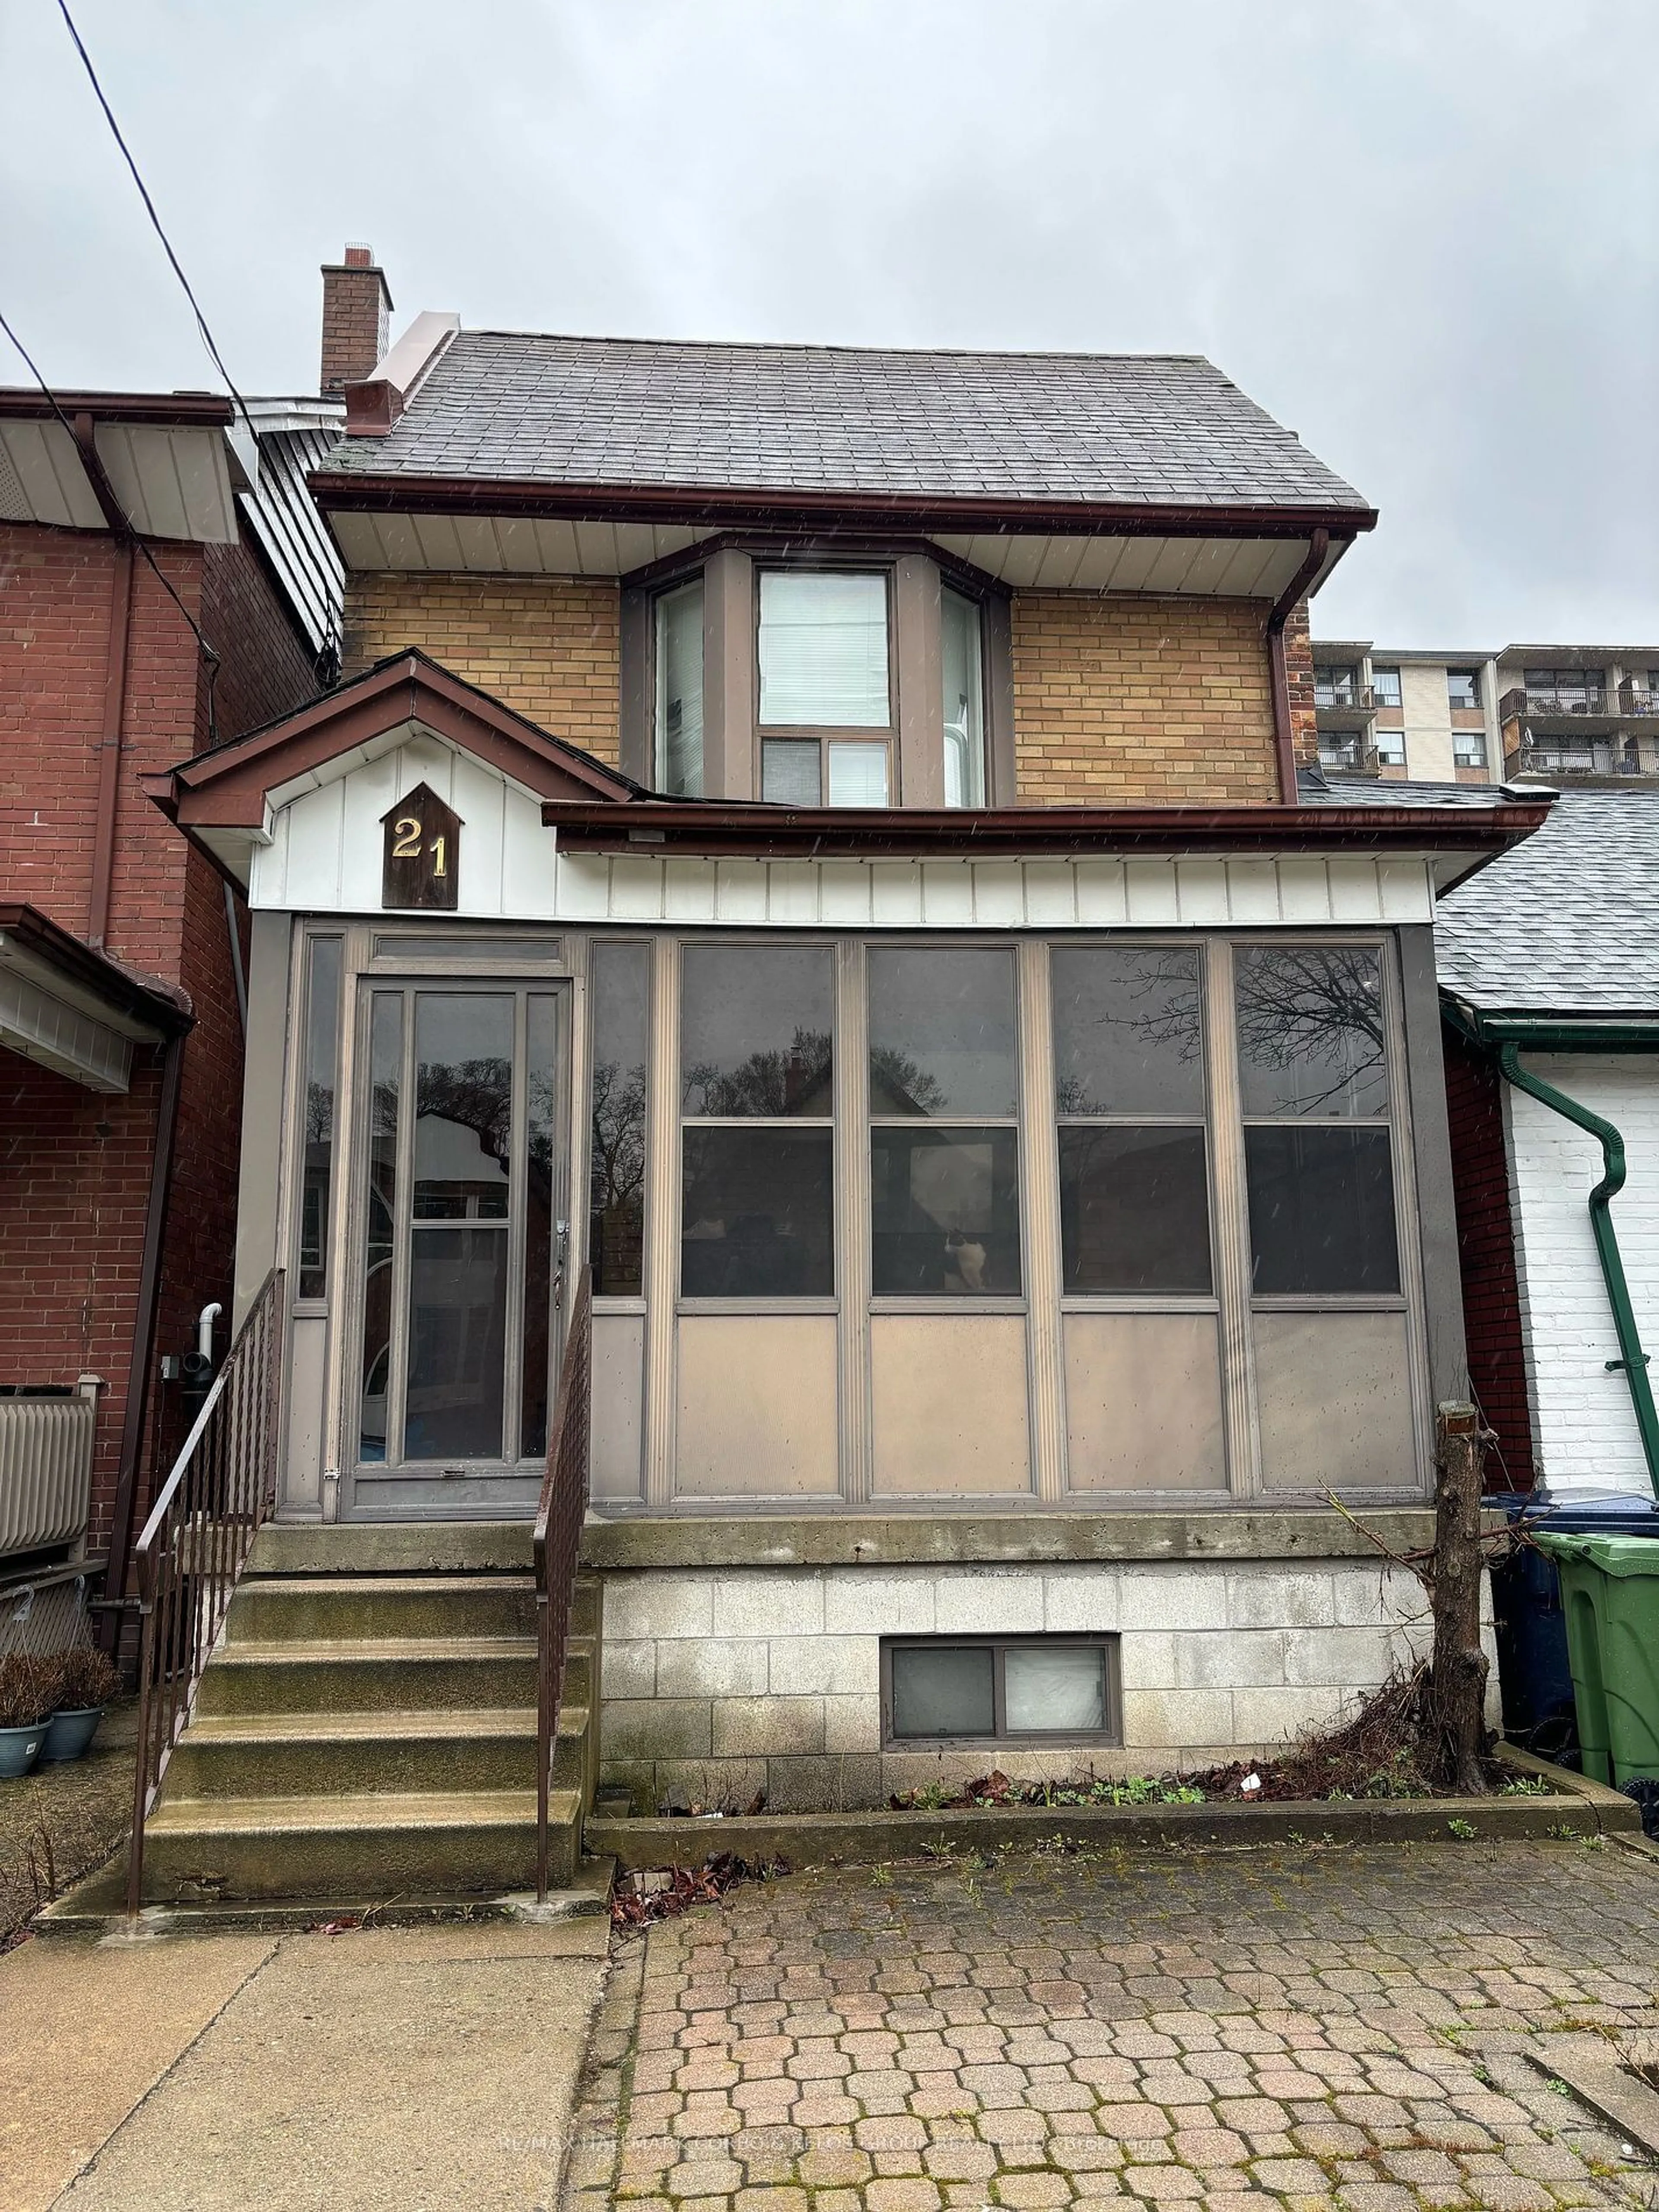 Frontside or backside of a home for 21 Torrens Ave, Toronto Ontario M4K 2H9